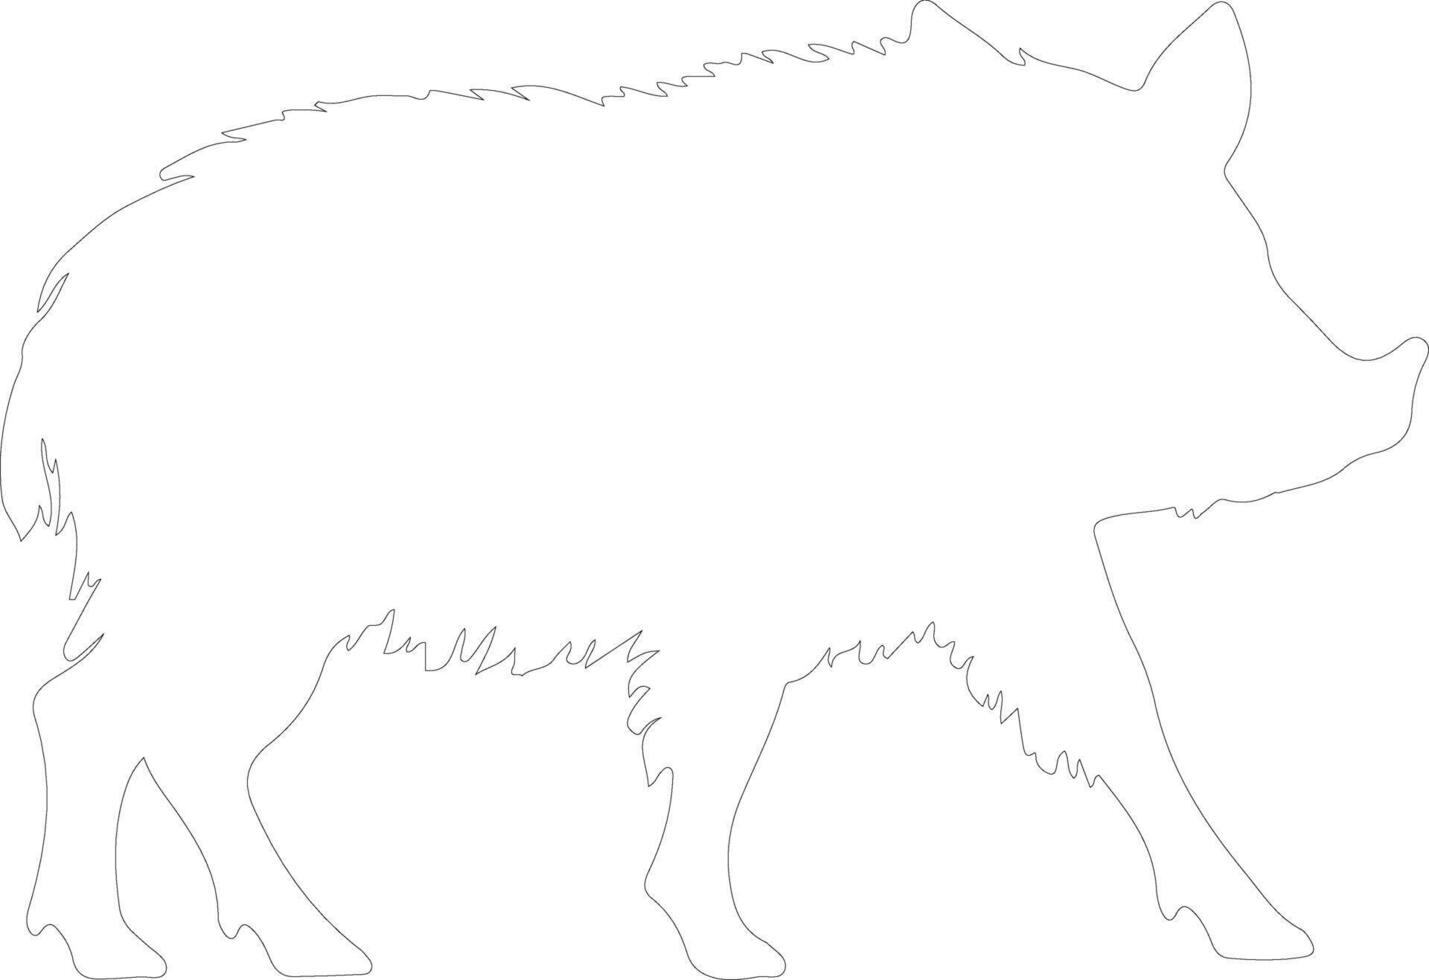 javelina  outline silhouette vector